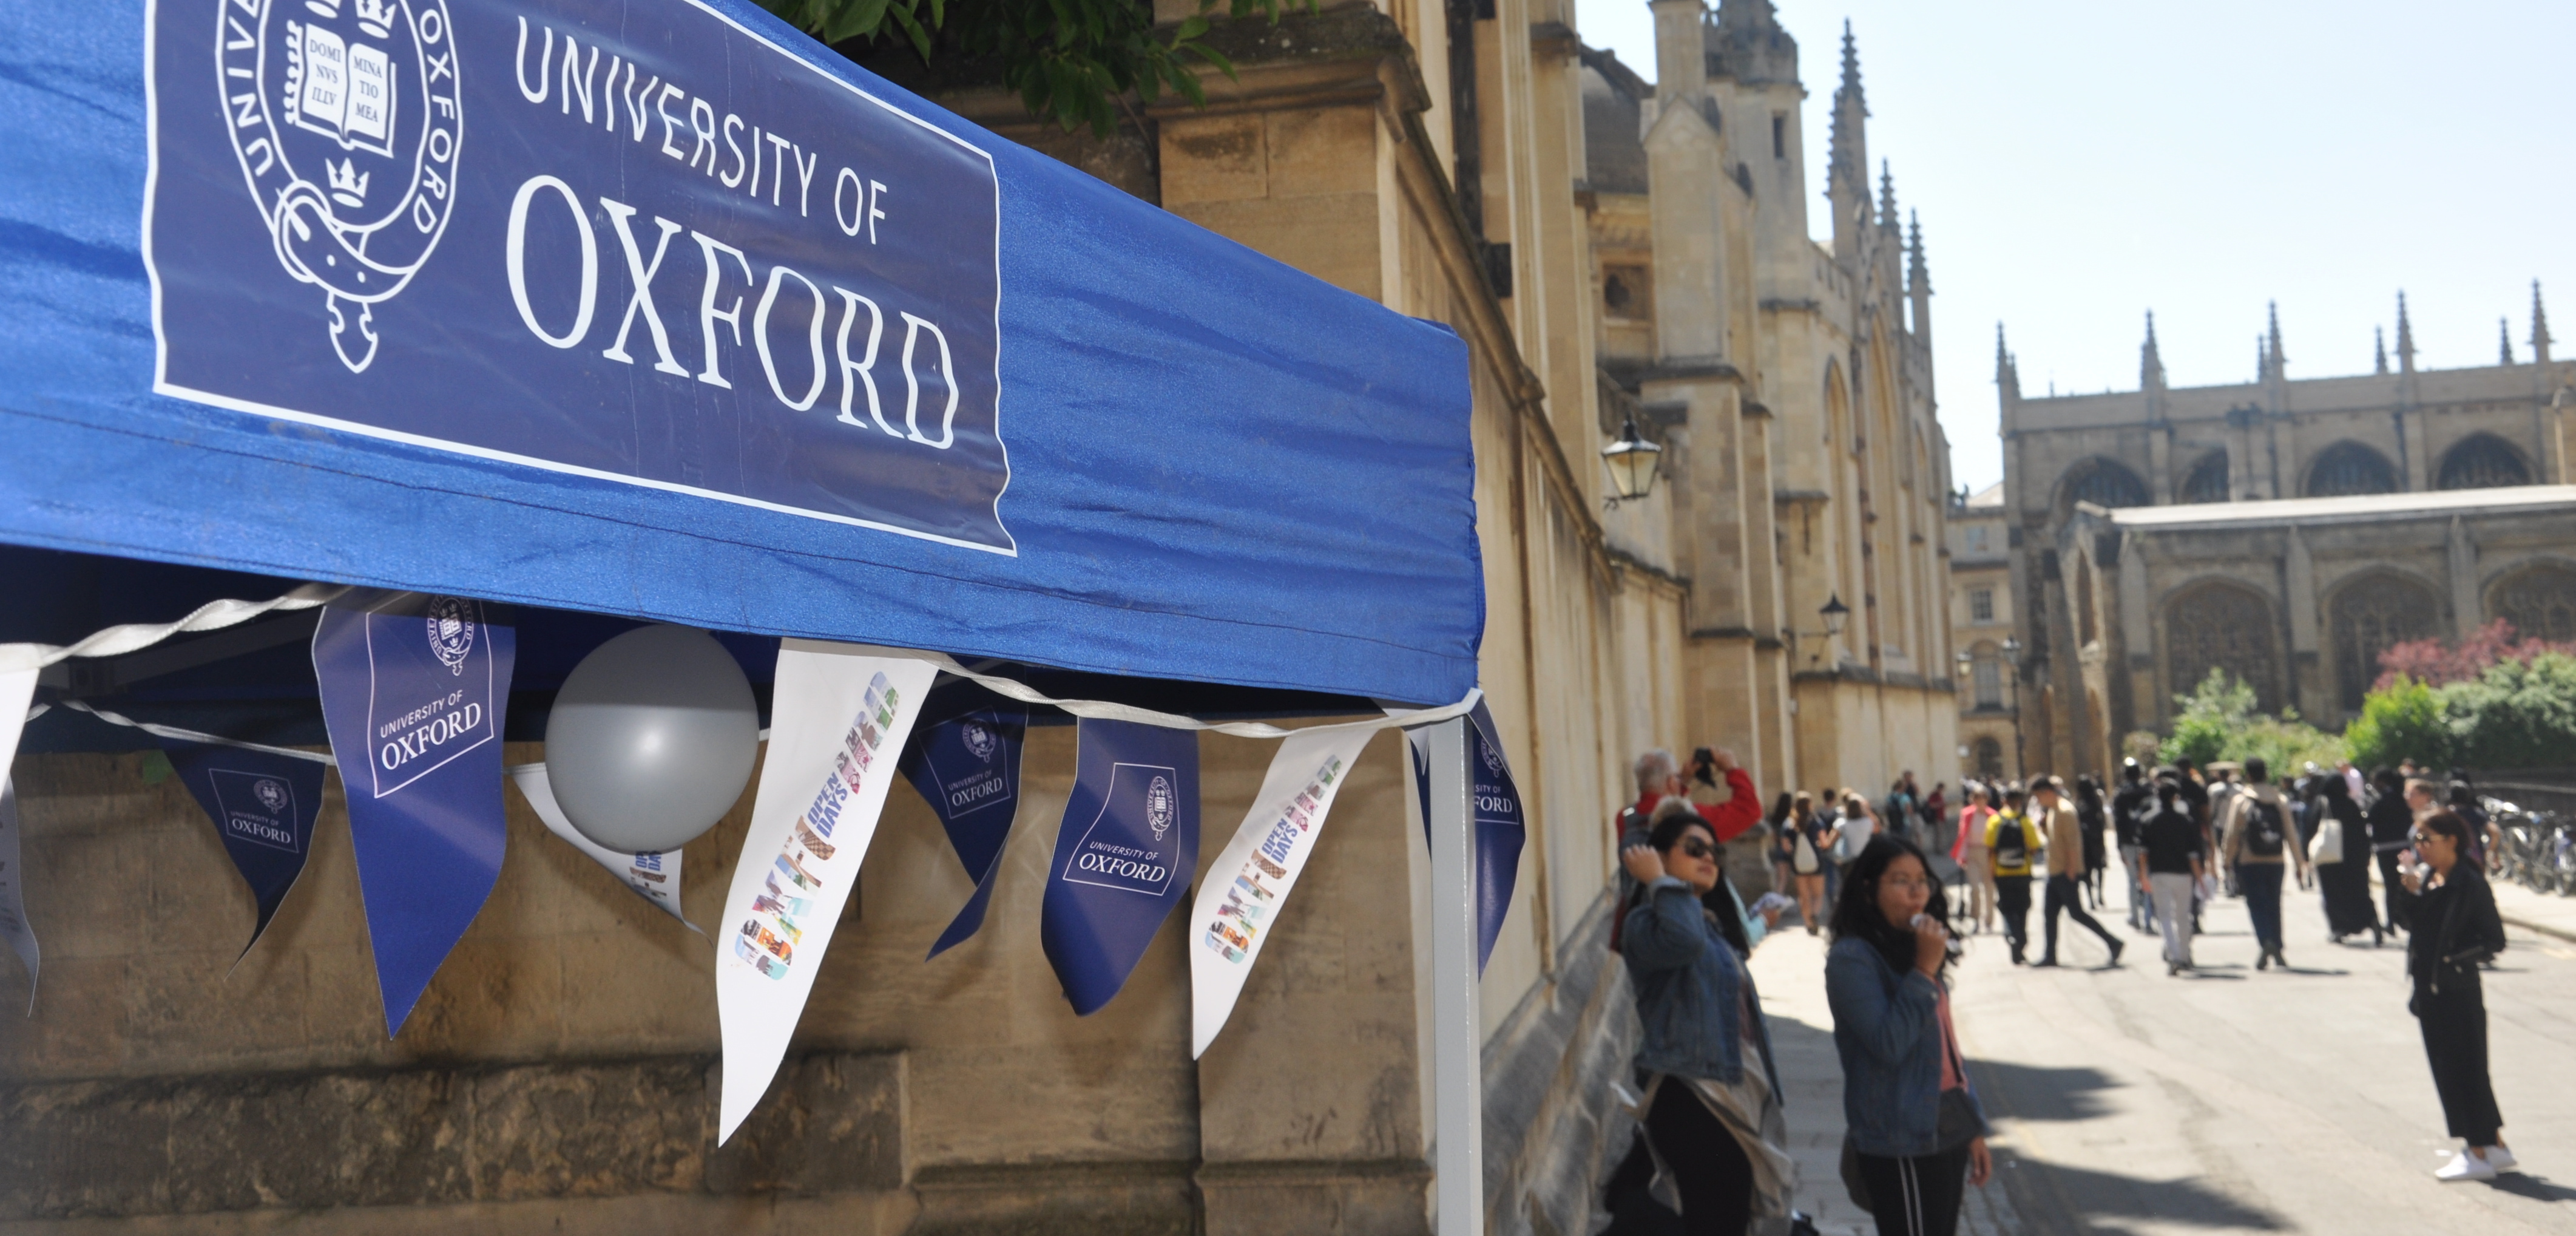 Thousands arrive in Oxford for Open Days University of Oxford